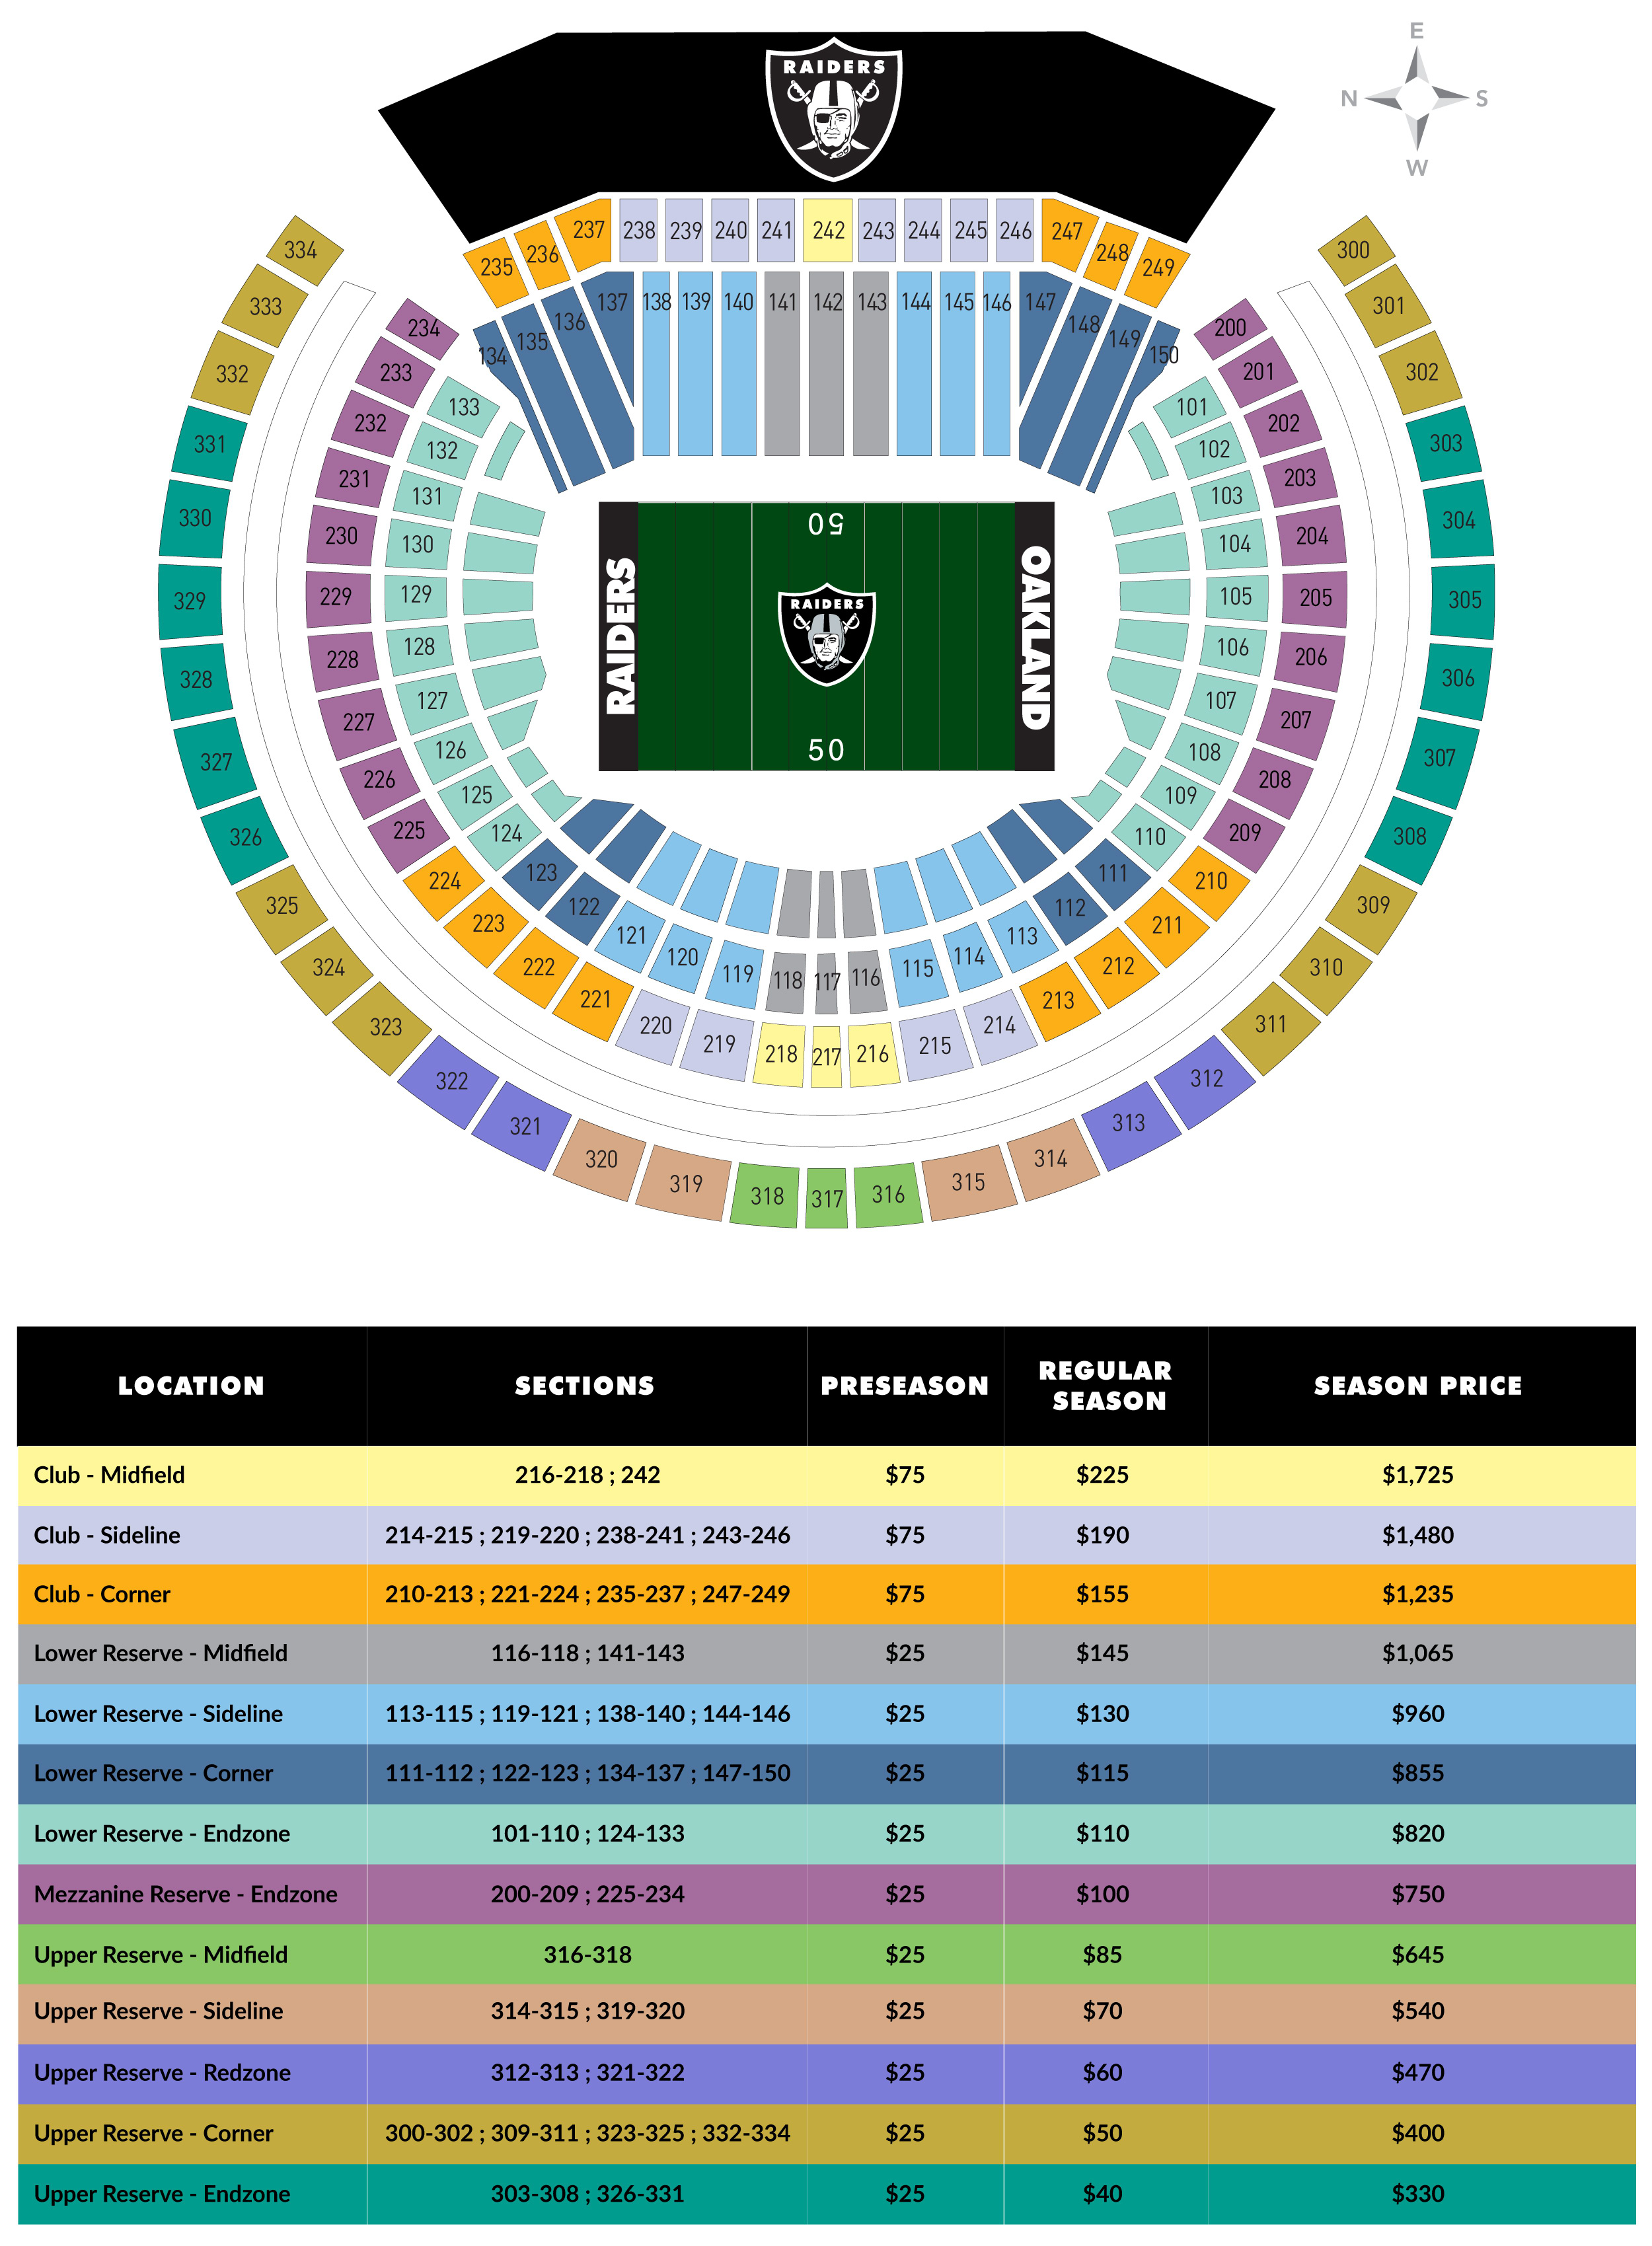 Seating and Pricing Map | Raiders.com2500 x 3399